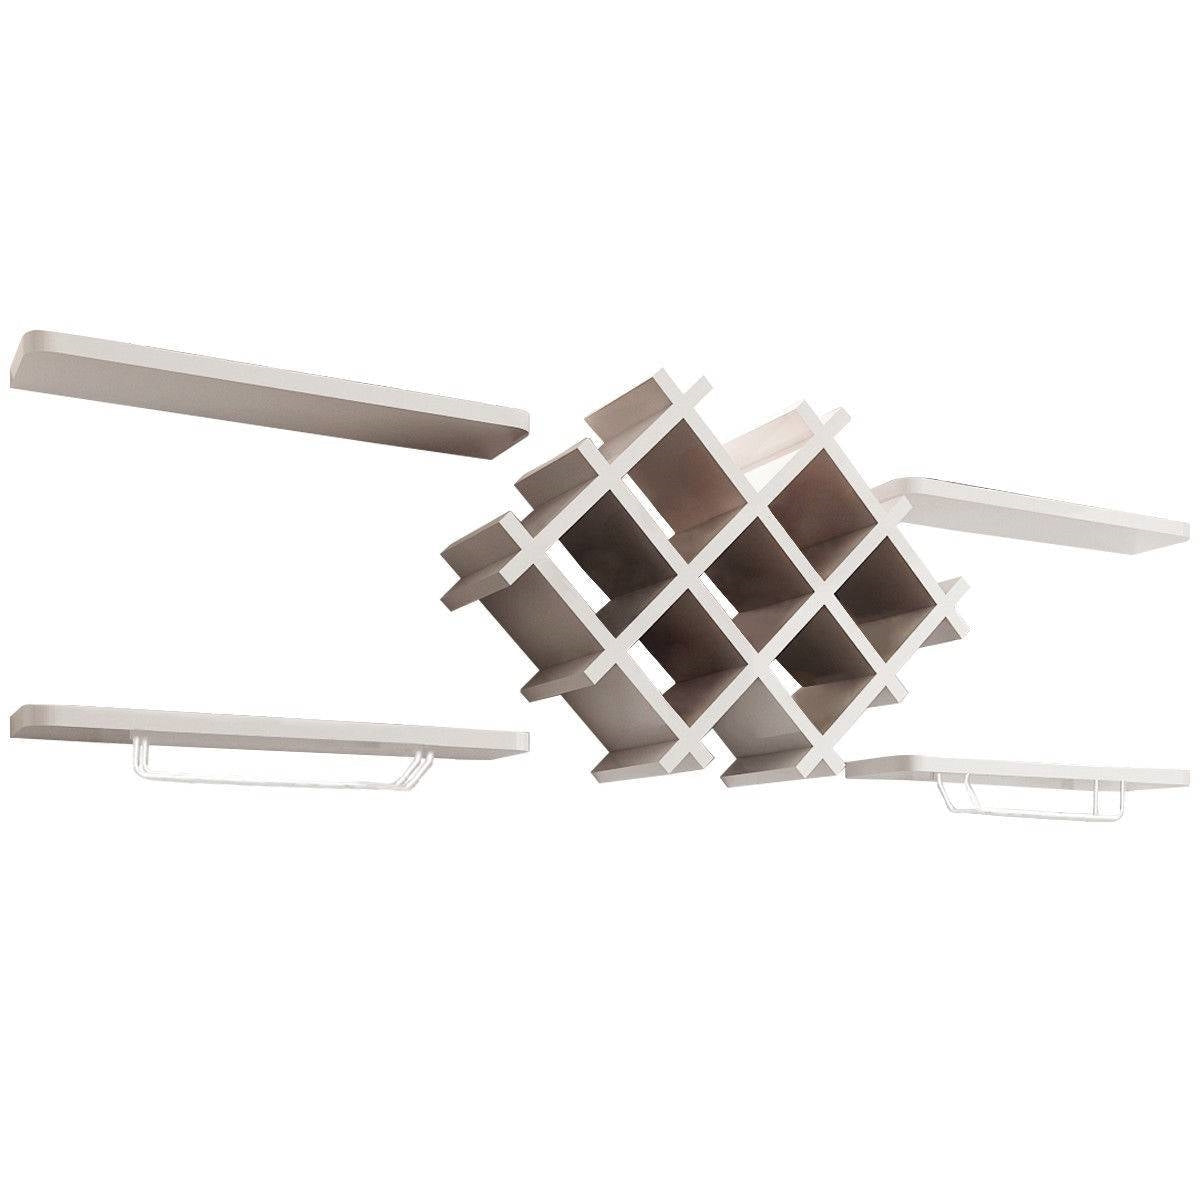 Kitchen > Wine Racks And Coolers - White 5-Piece Wall Mounted Wine Rack Set With Storage Shelves